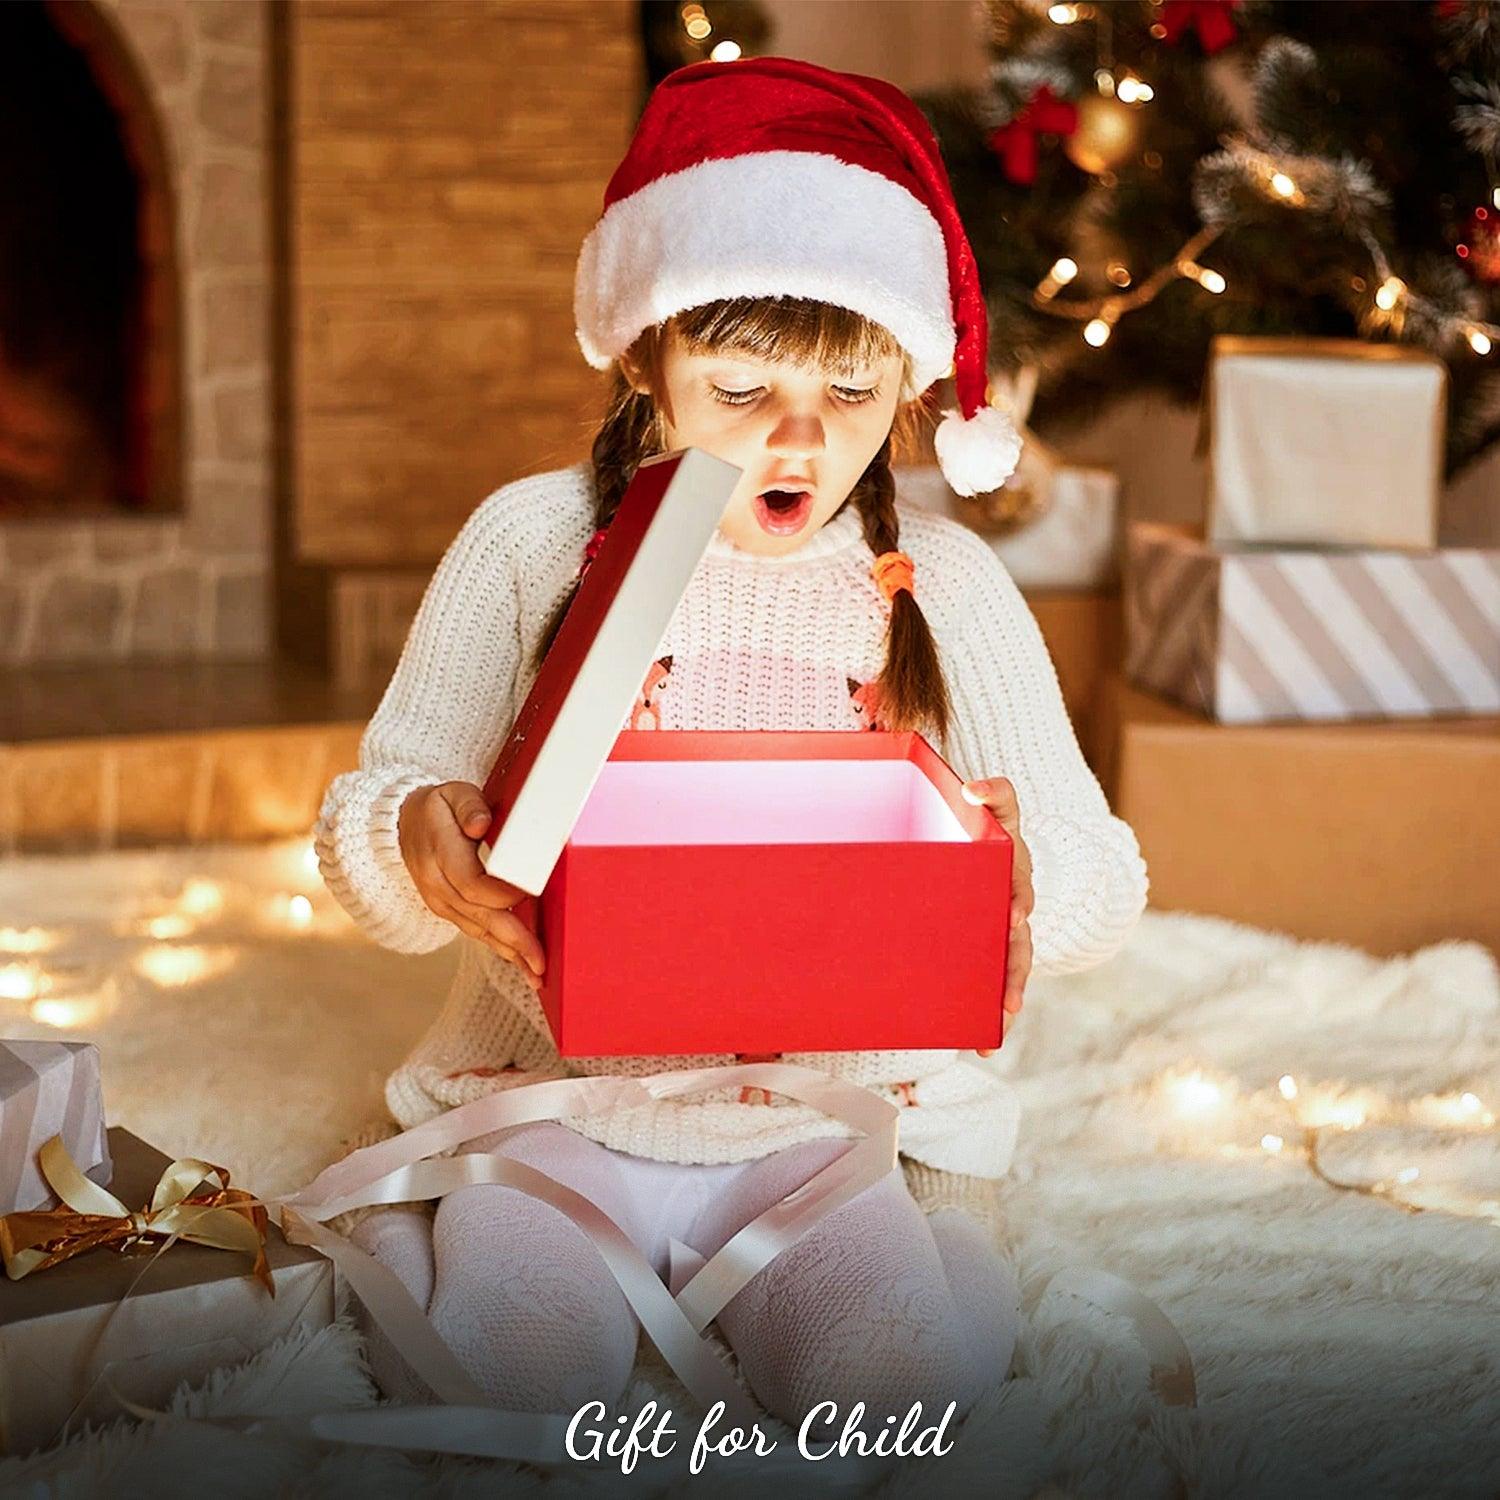 Gifts for Kids - Present Them